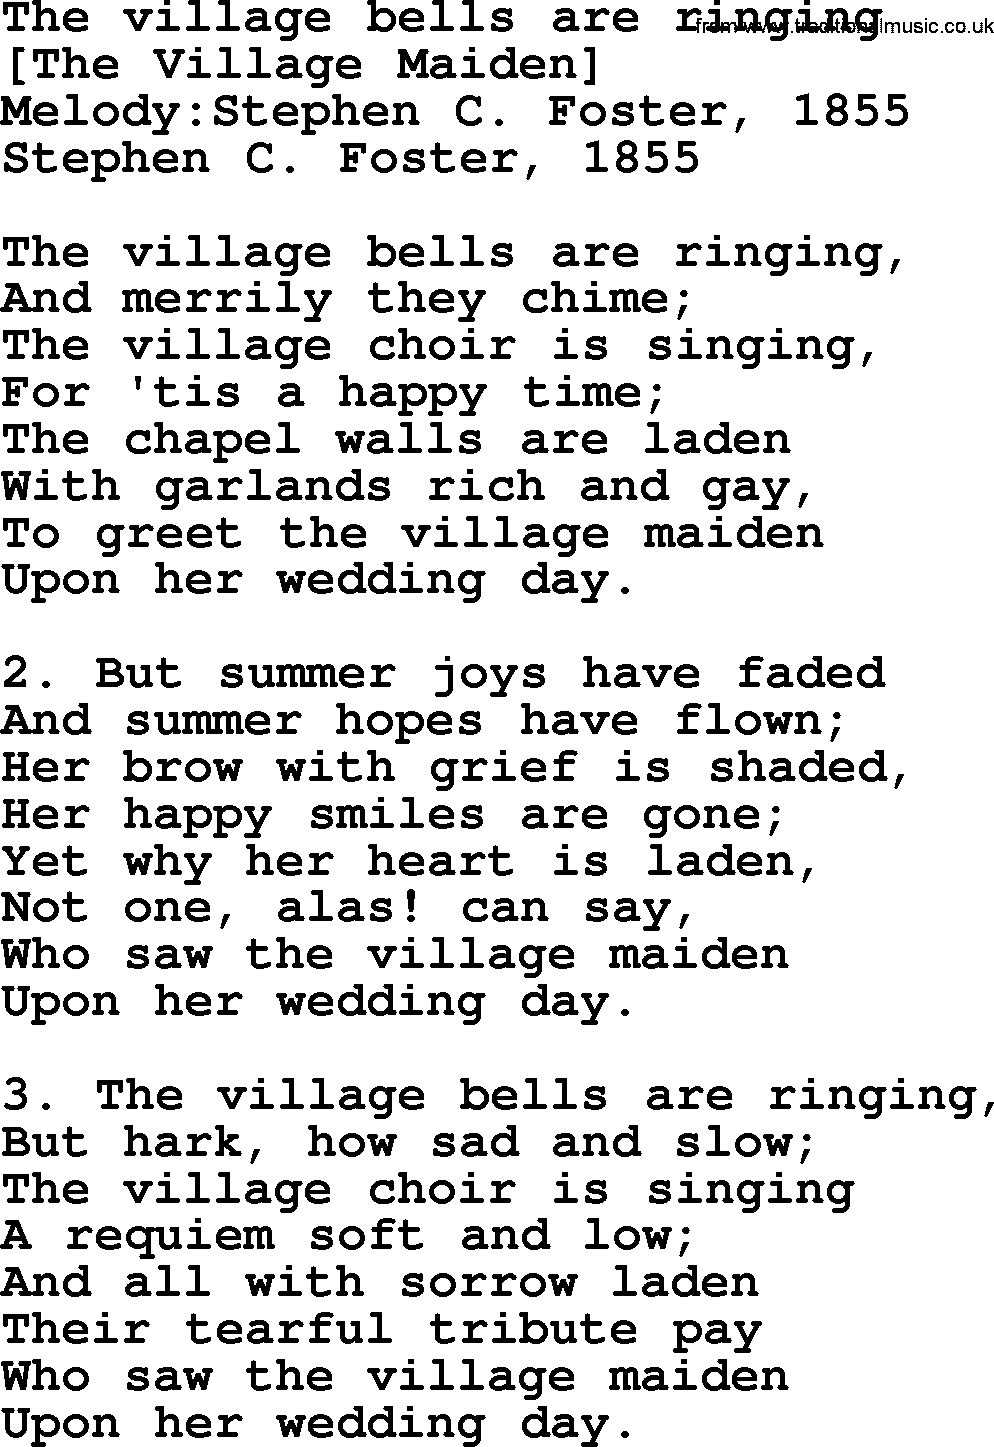 Old American Song: The Village Bells Are Ringing, lyrics